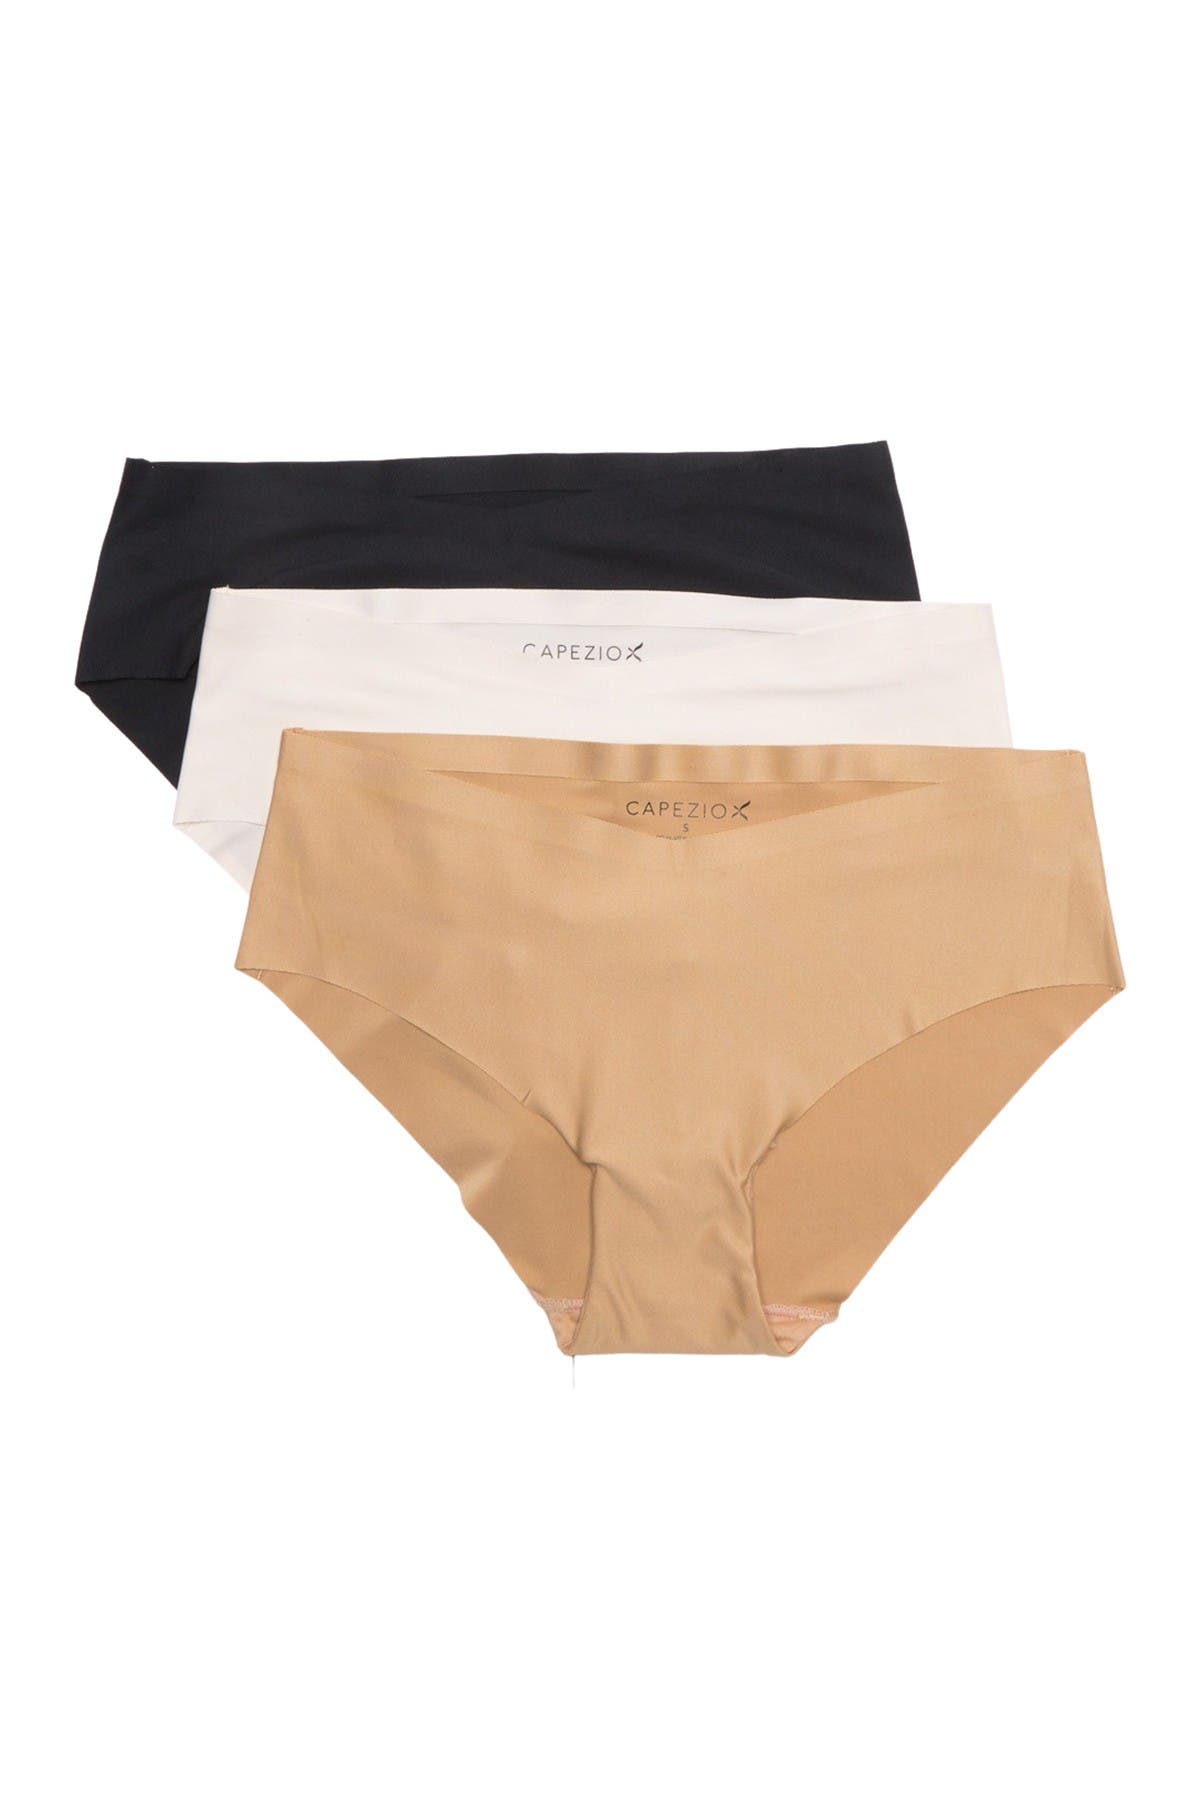 Studio By Capezio Seamless Hipster Panties In Nude/ Cream/ Black